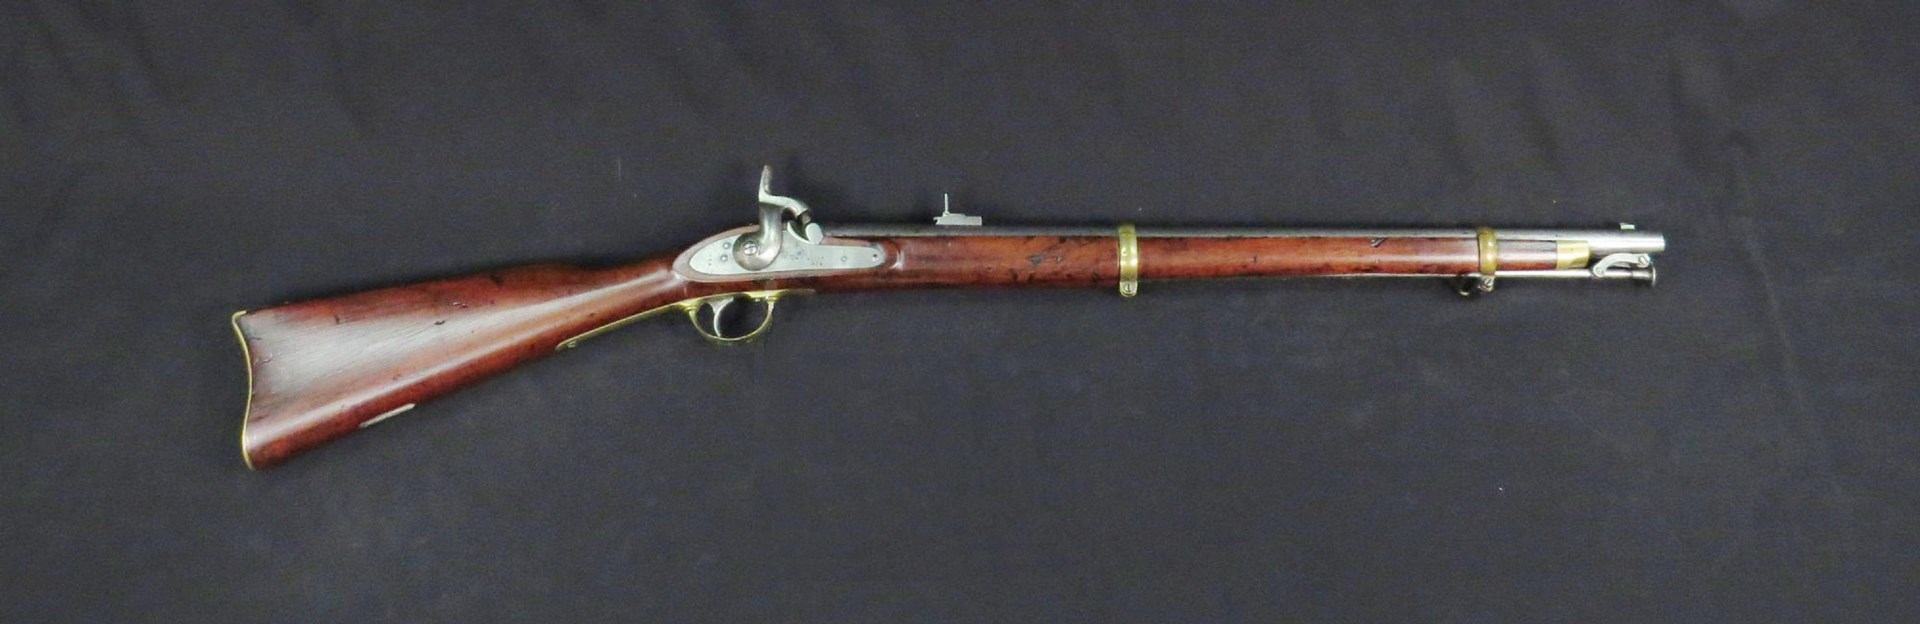 right-side view of confederate army Tallassee carbine